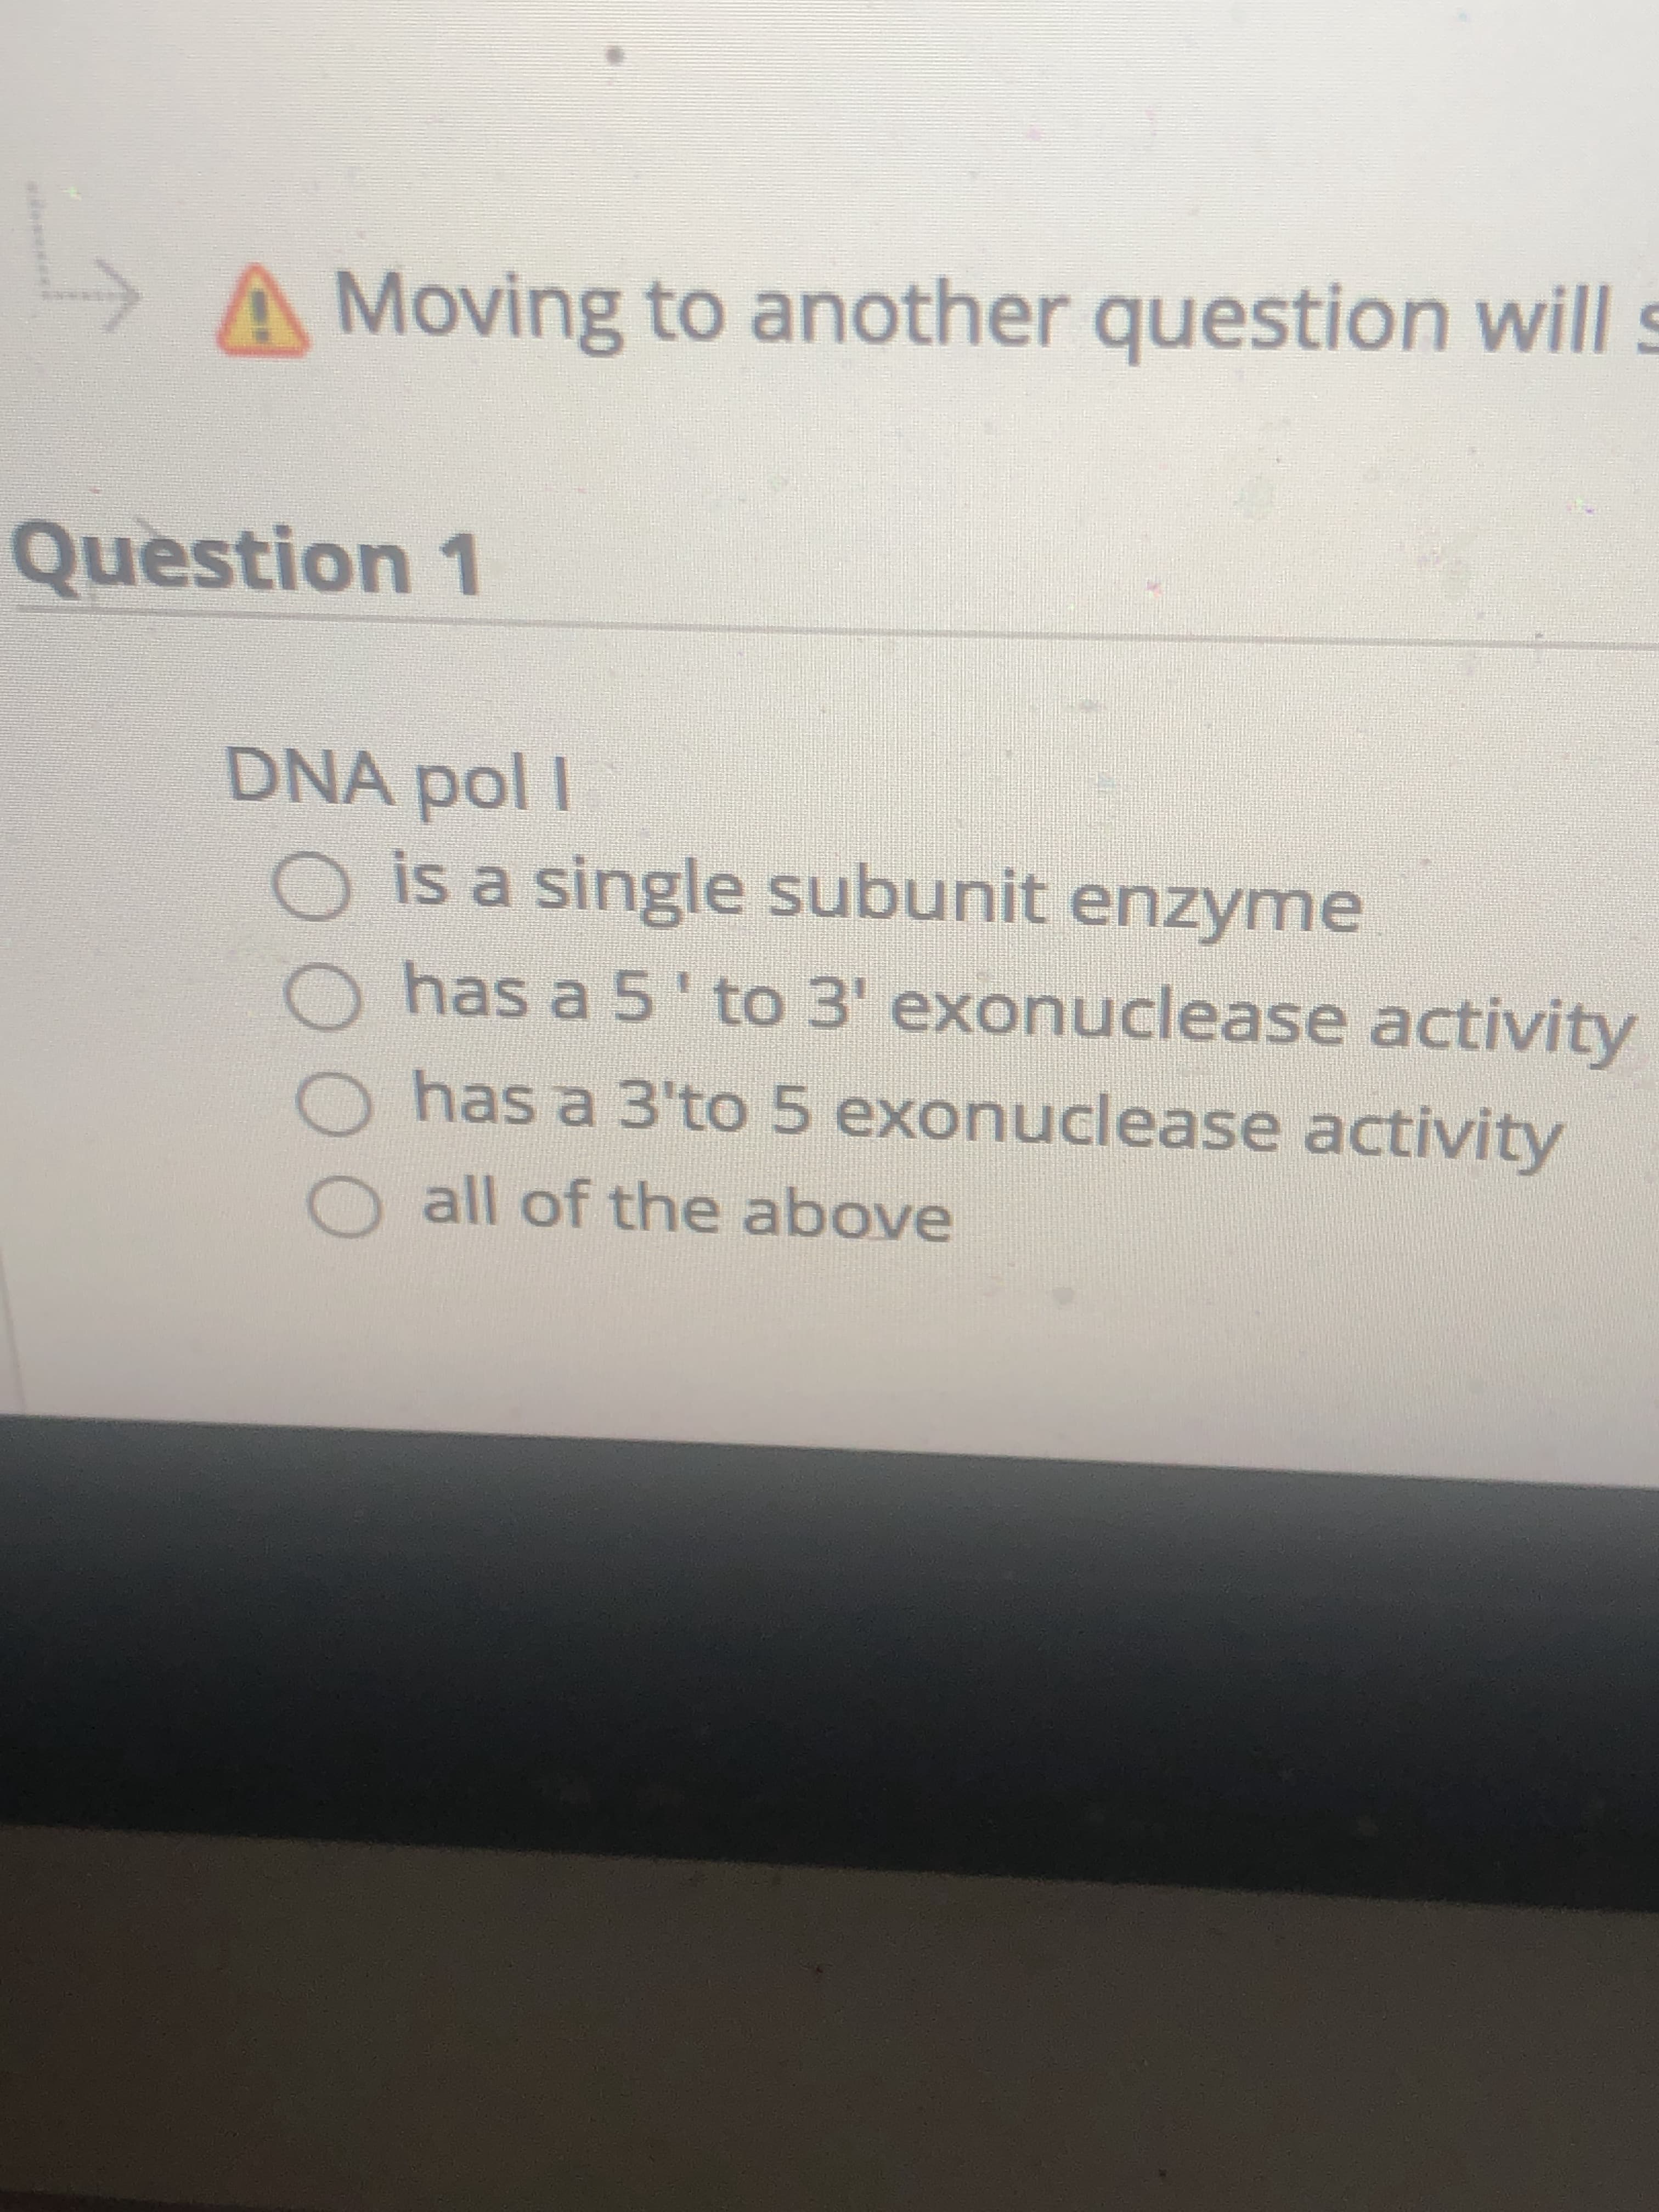 DNA pol I
O is a single subunit enzyme
has a 5' to 3' exonuclease activity
